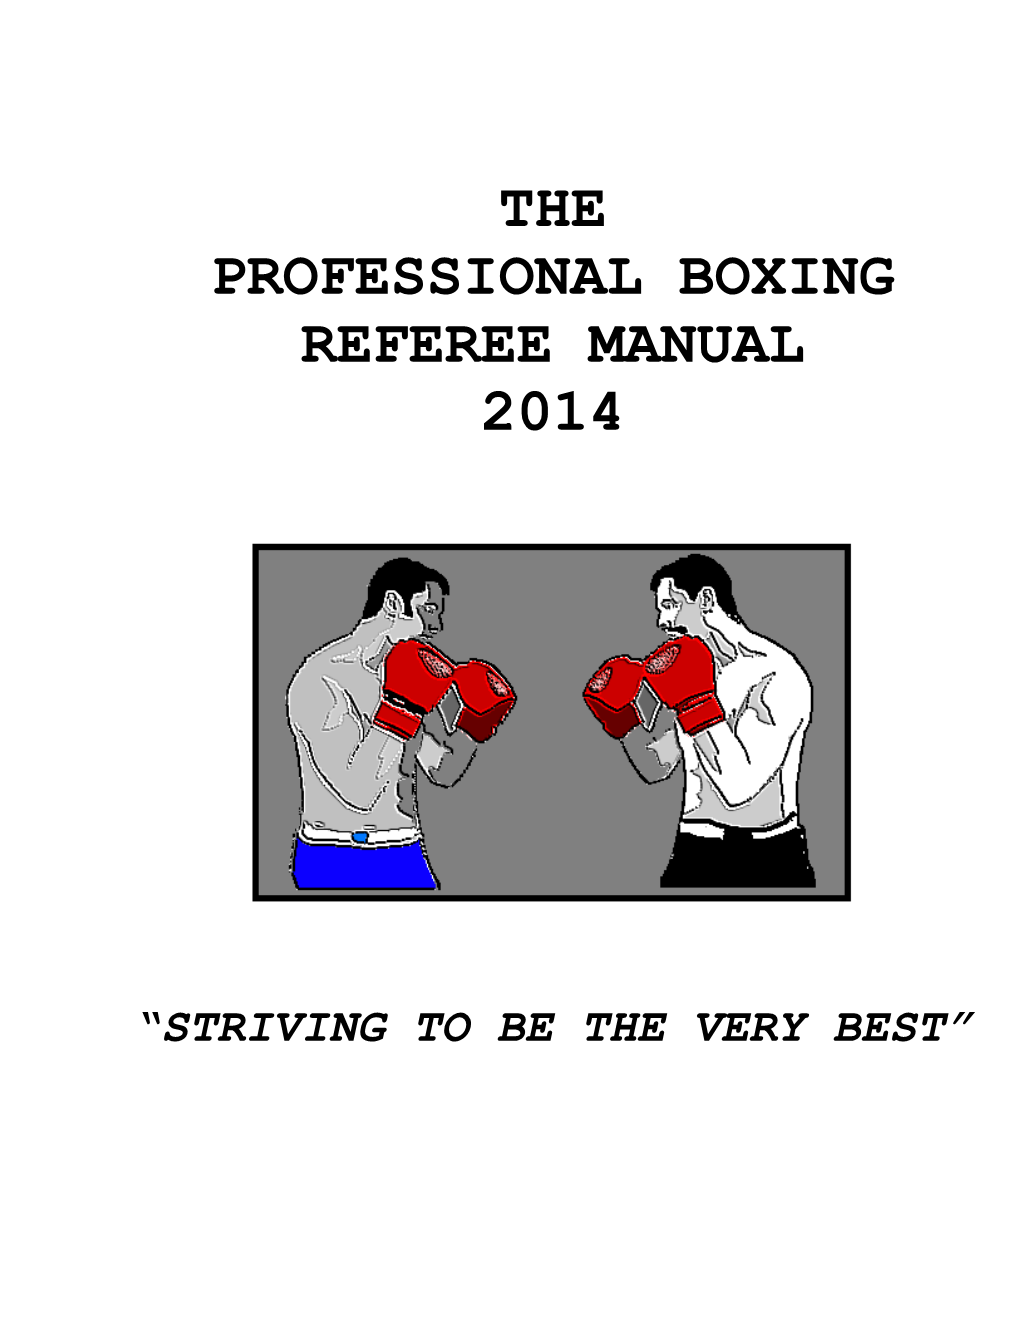 The Professional Boxing Referee Manual 2014